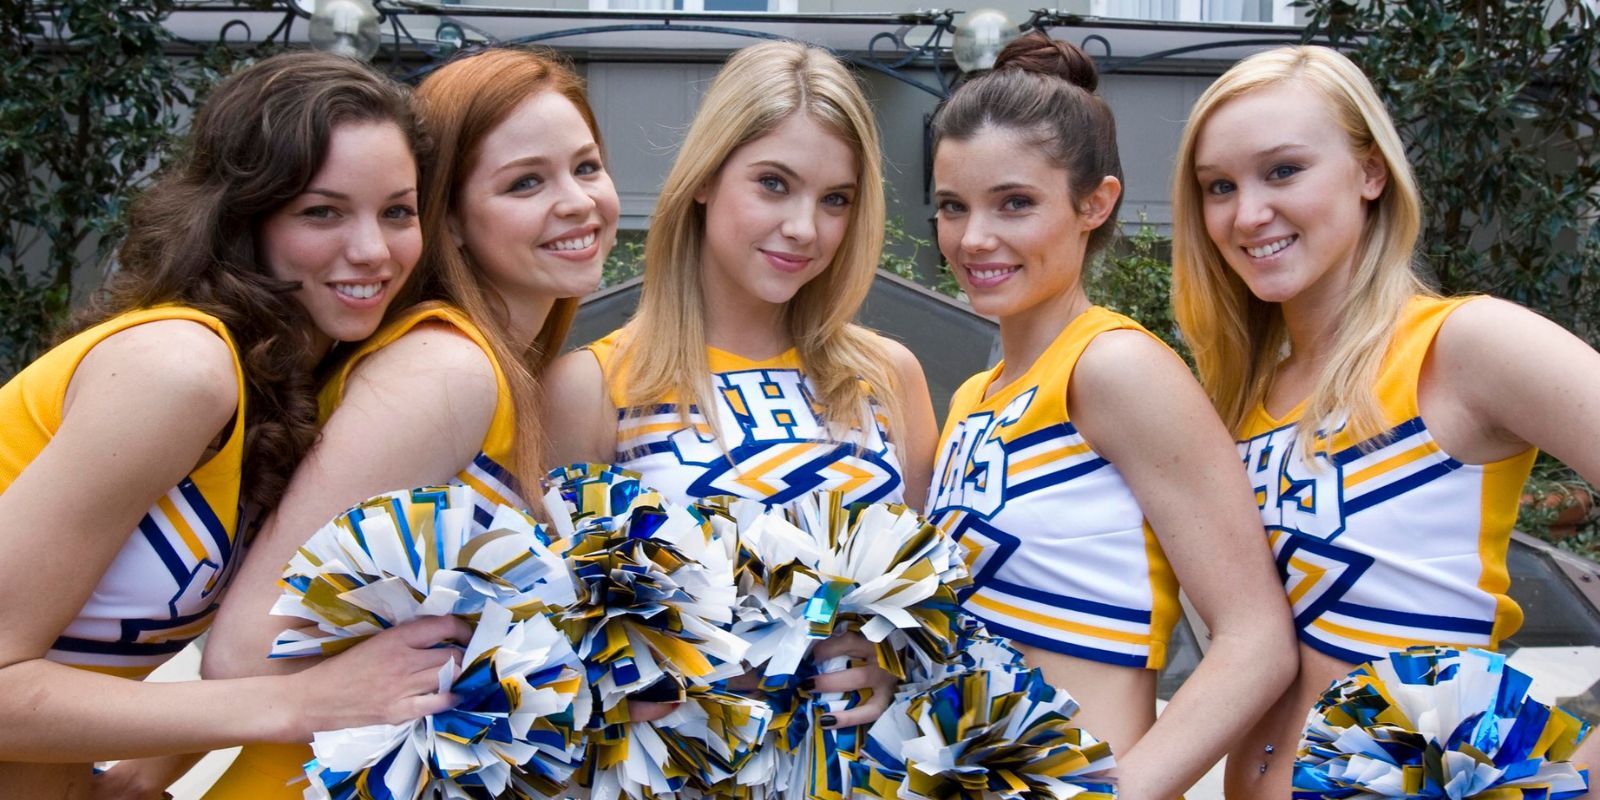 The Fab Five posing in cheer uniforms